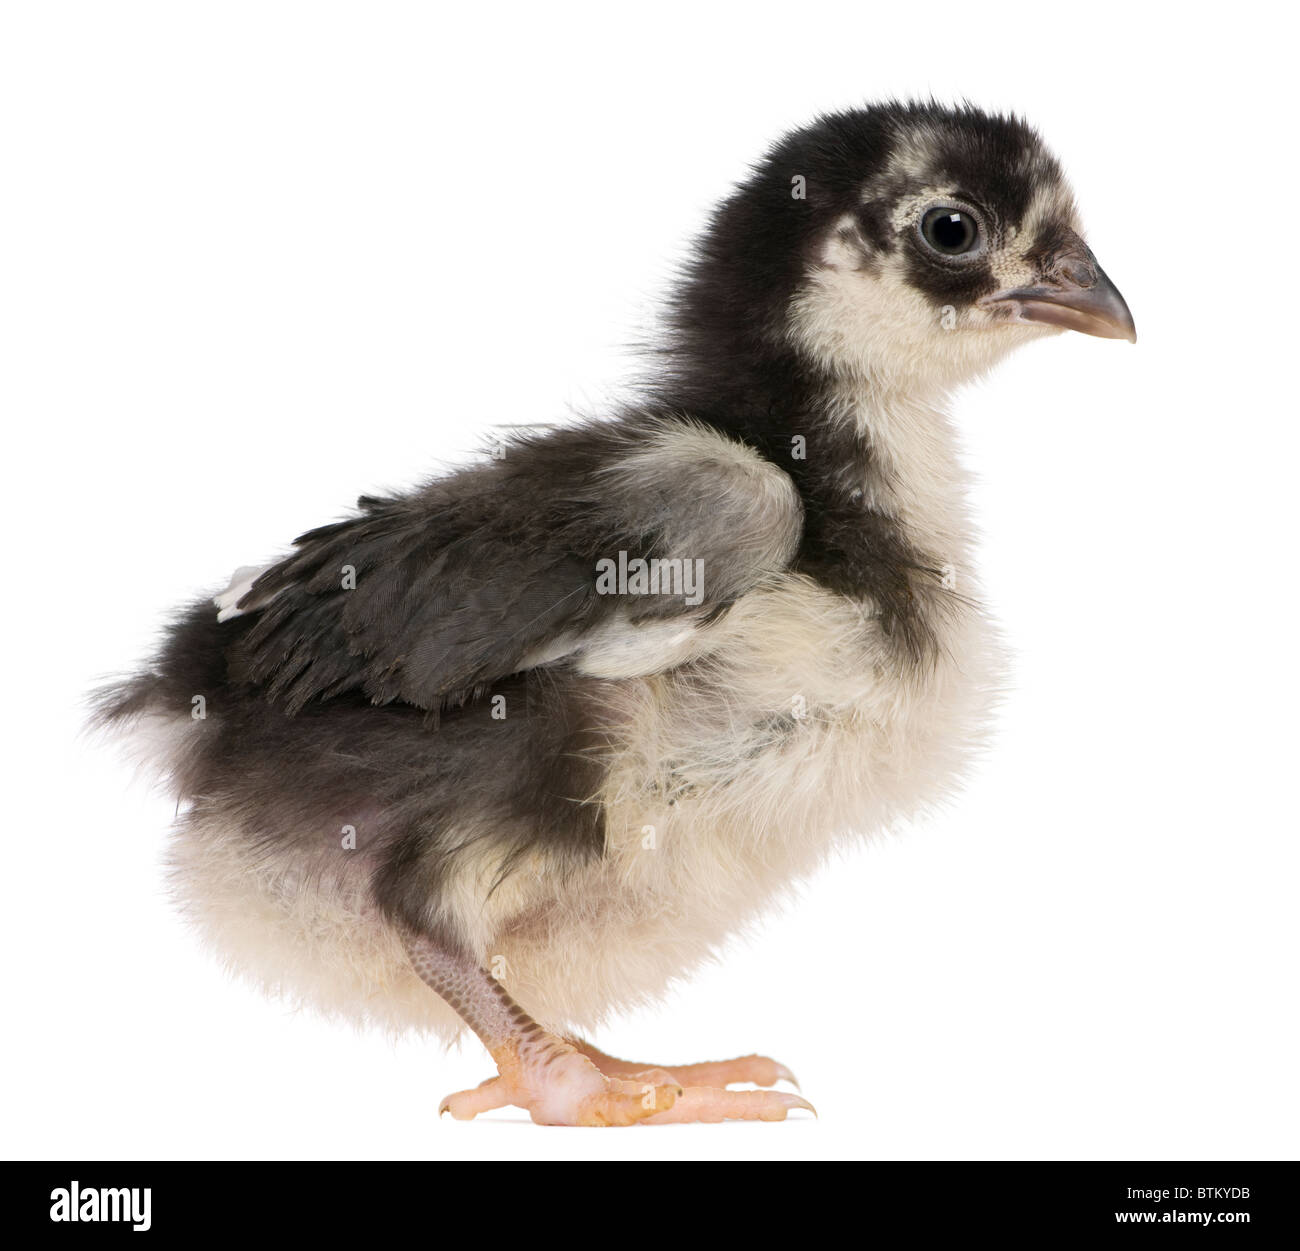 Chick, 3 weeks old, standing in front of white background Stock Photo